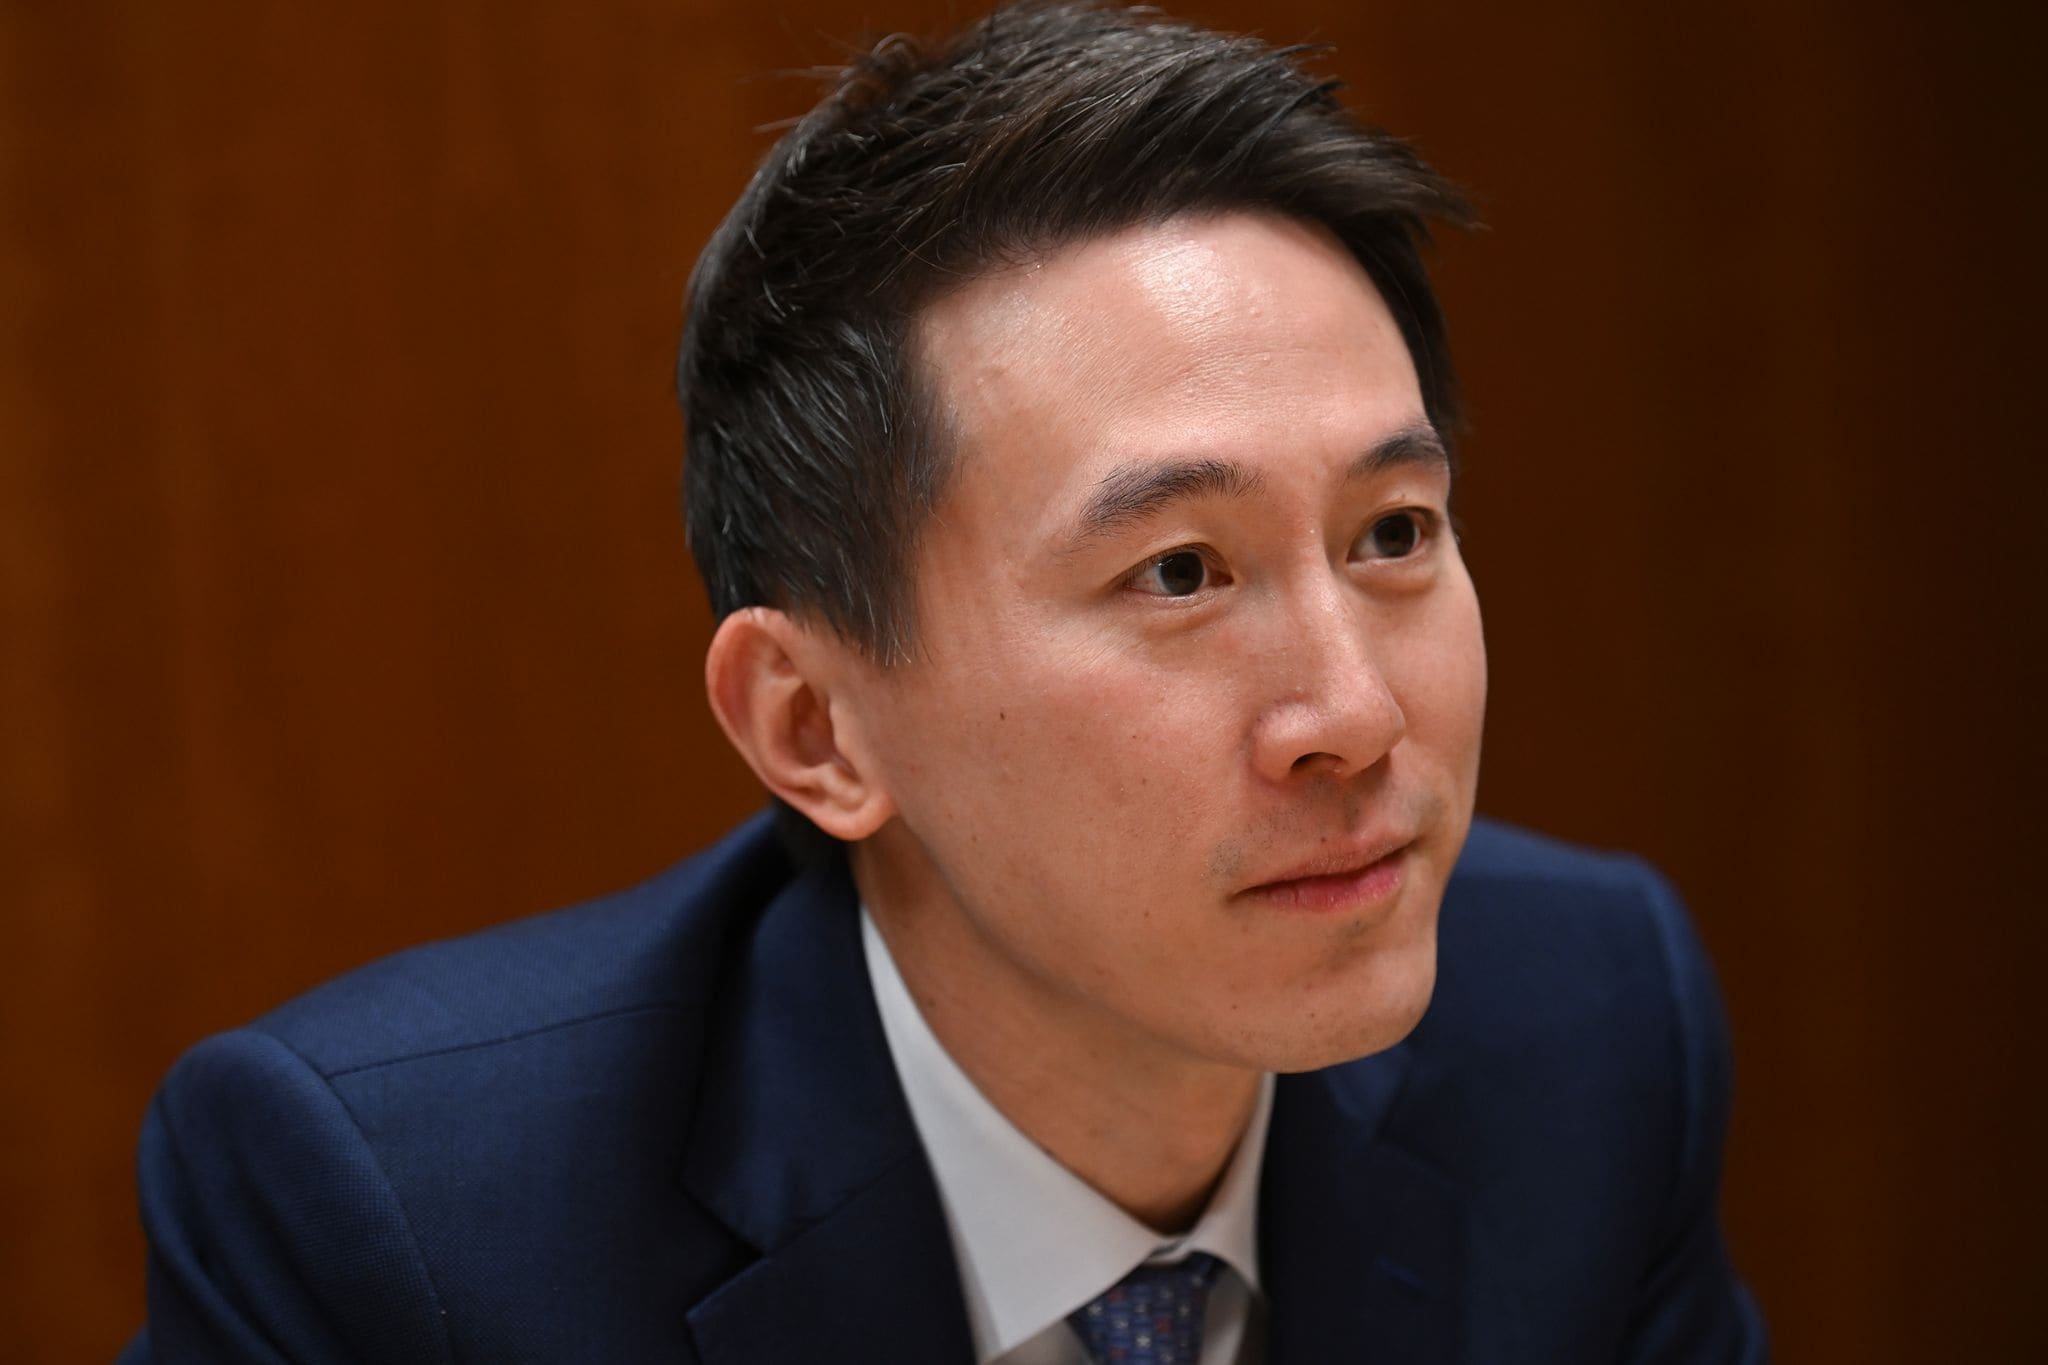 Who is TikTok CEO Shou Zi Chew? Key facts ahead of his congressional hearing.